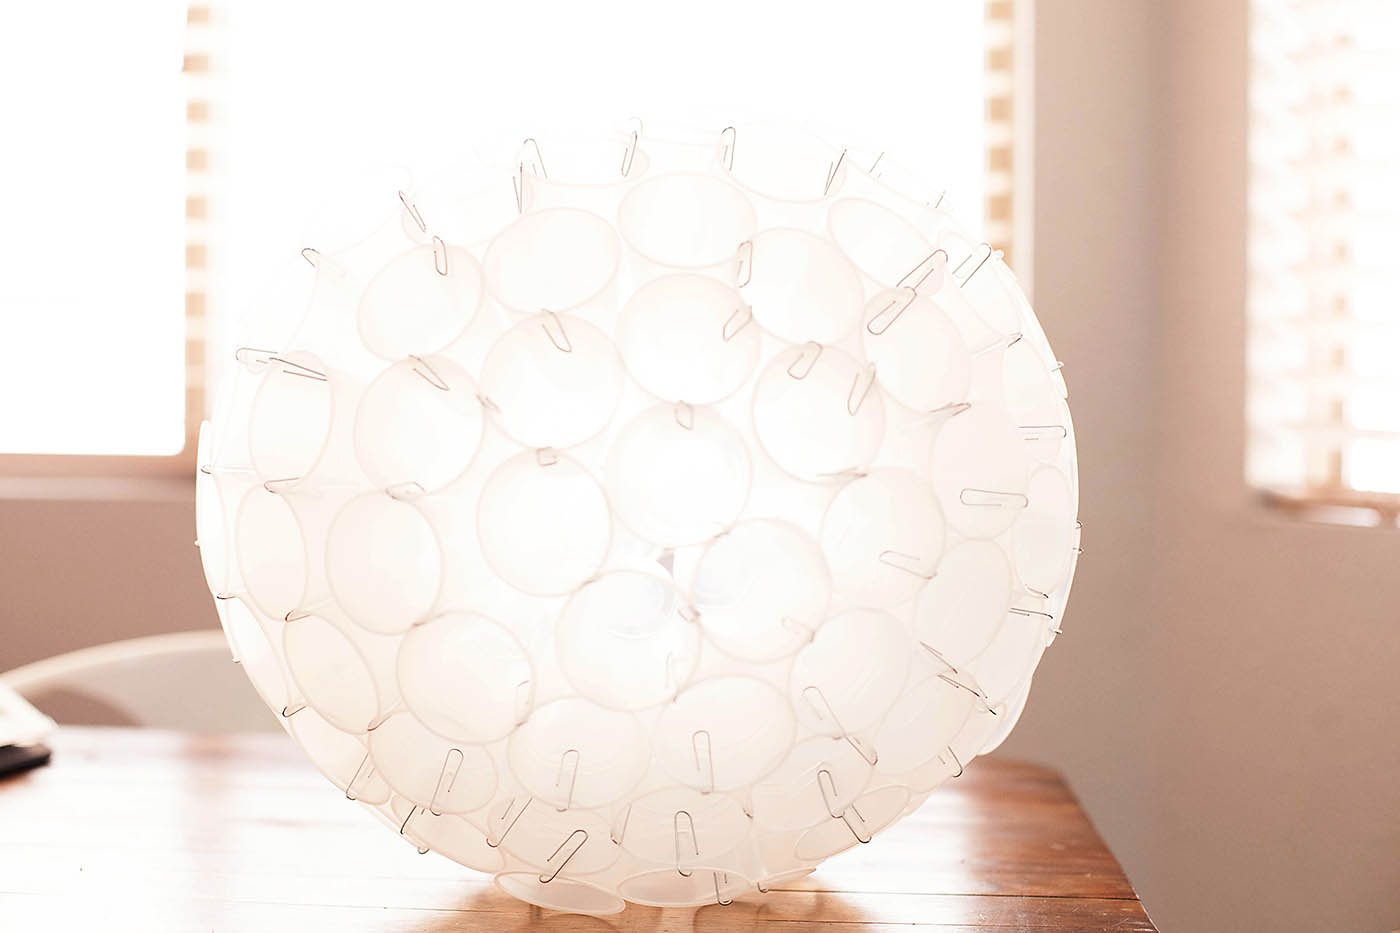 DIY sphere made from plastic cups. from All for the Boys blog